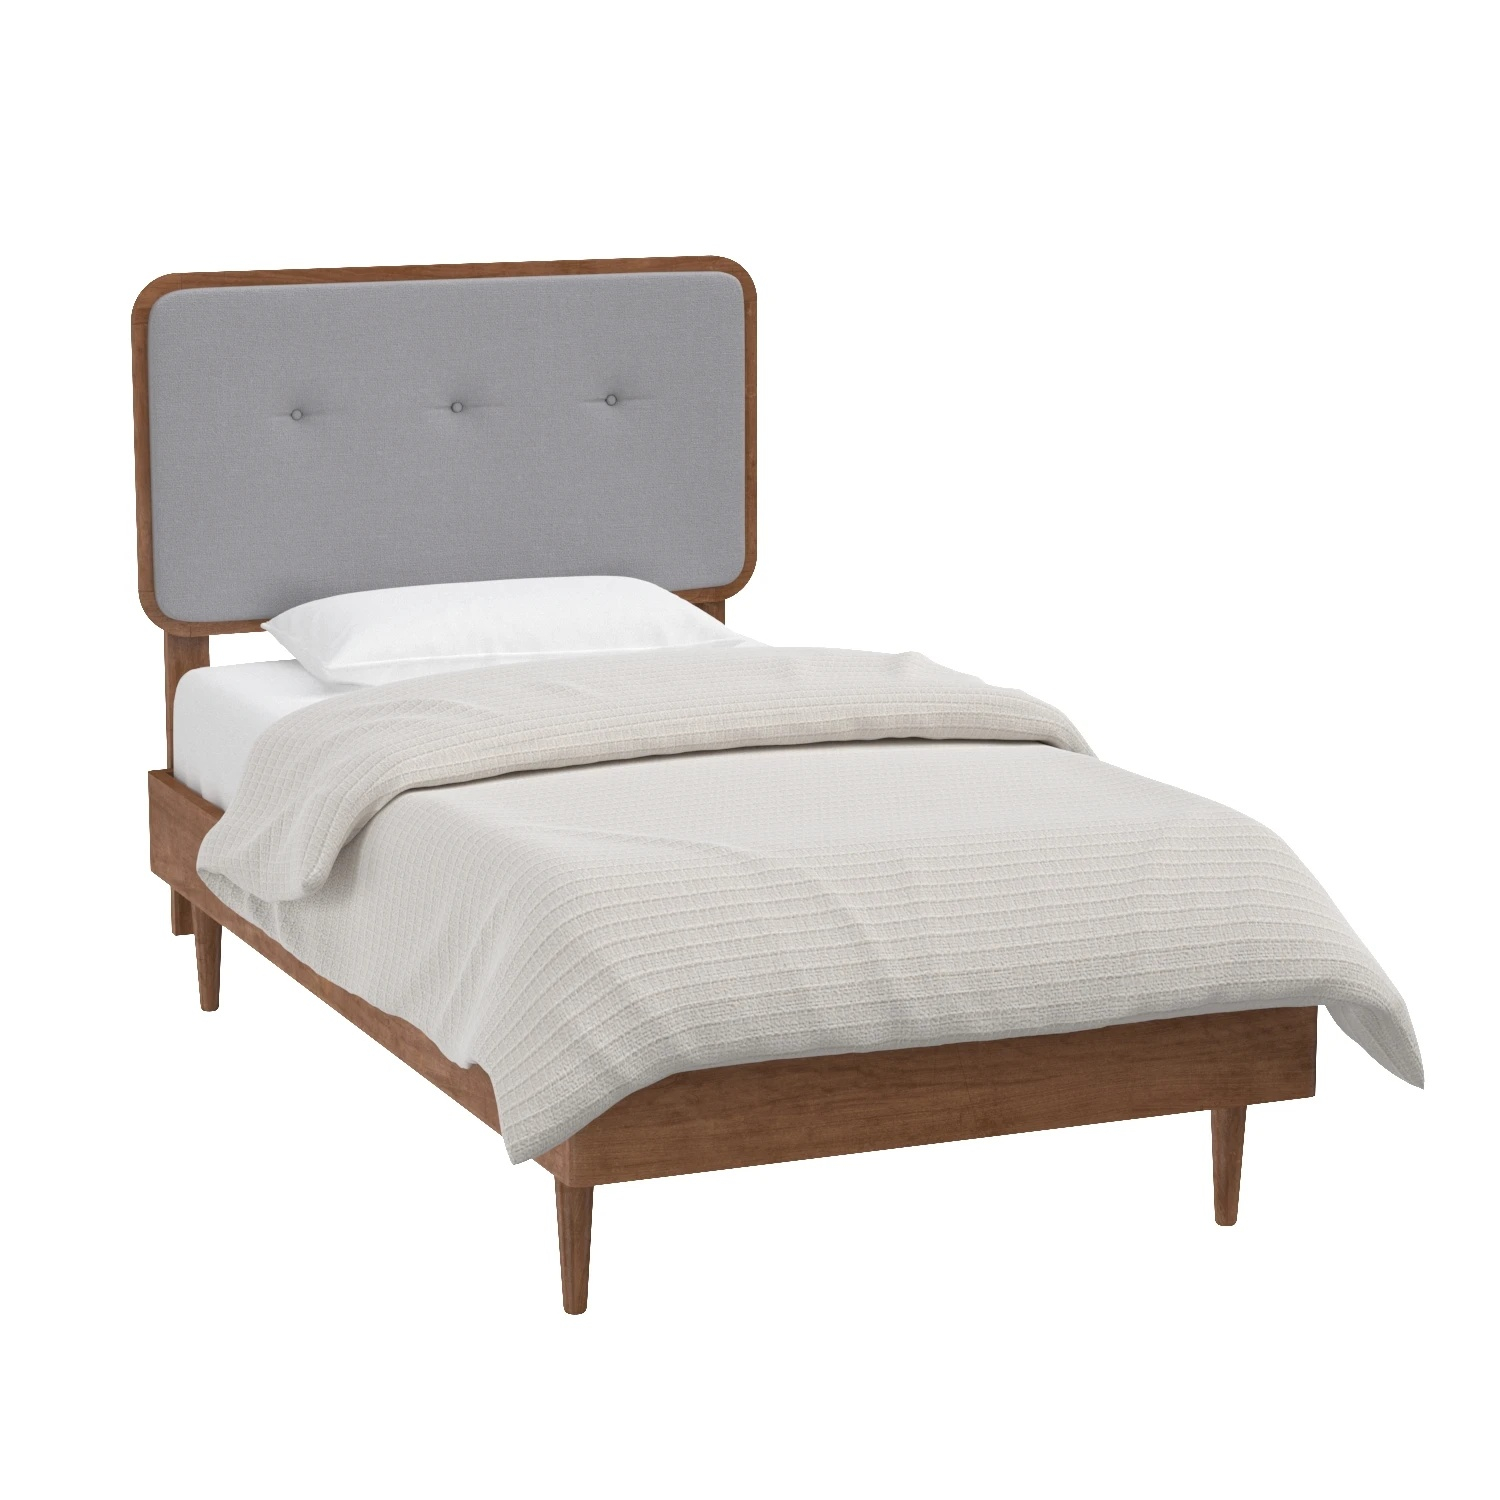 Collection of Four Single Bed 3D Bed Models 3D Model_06